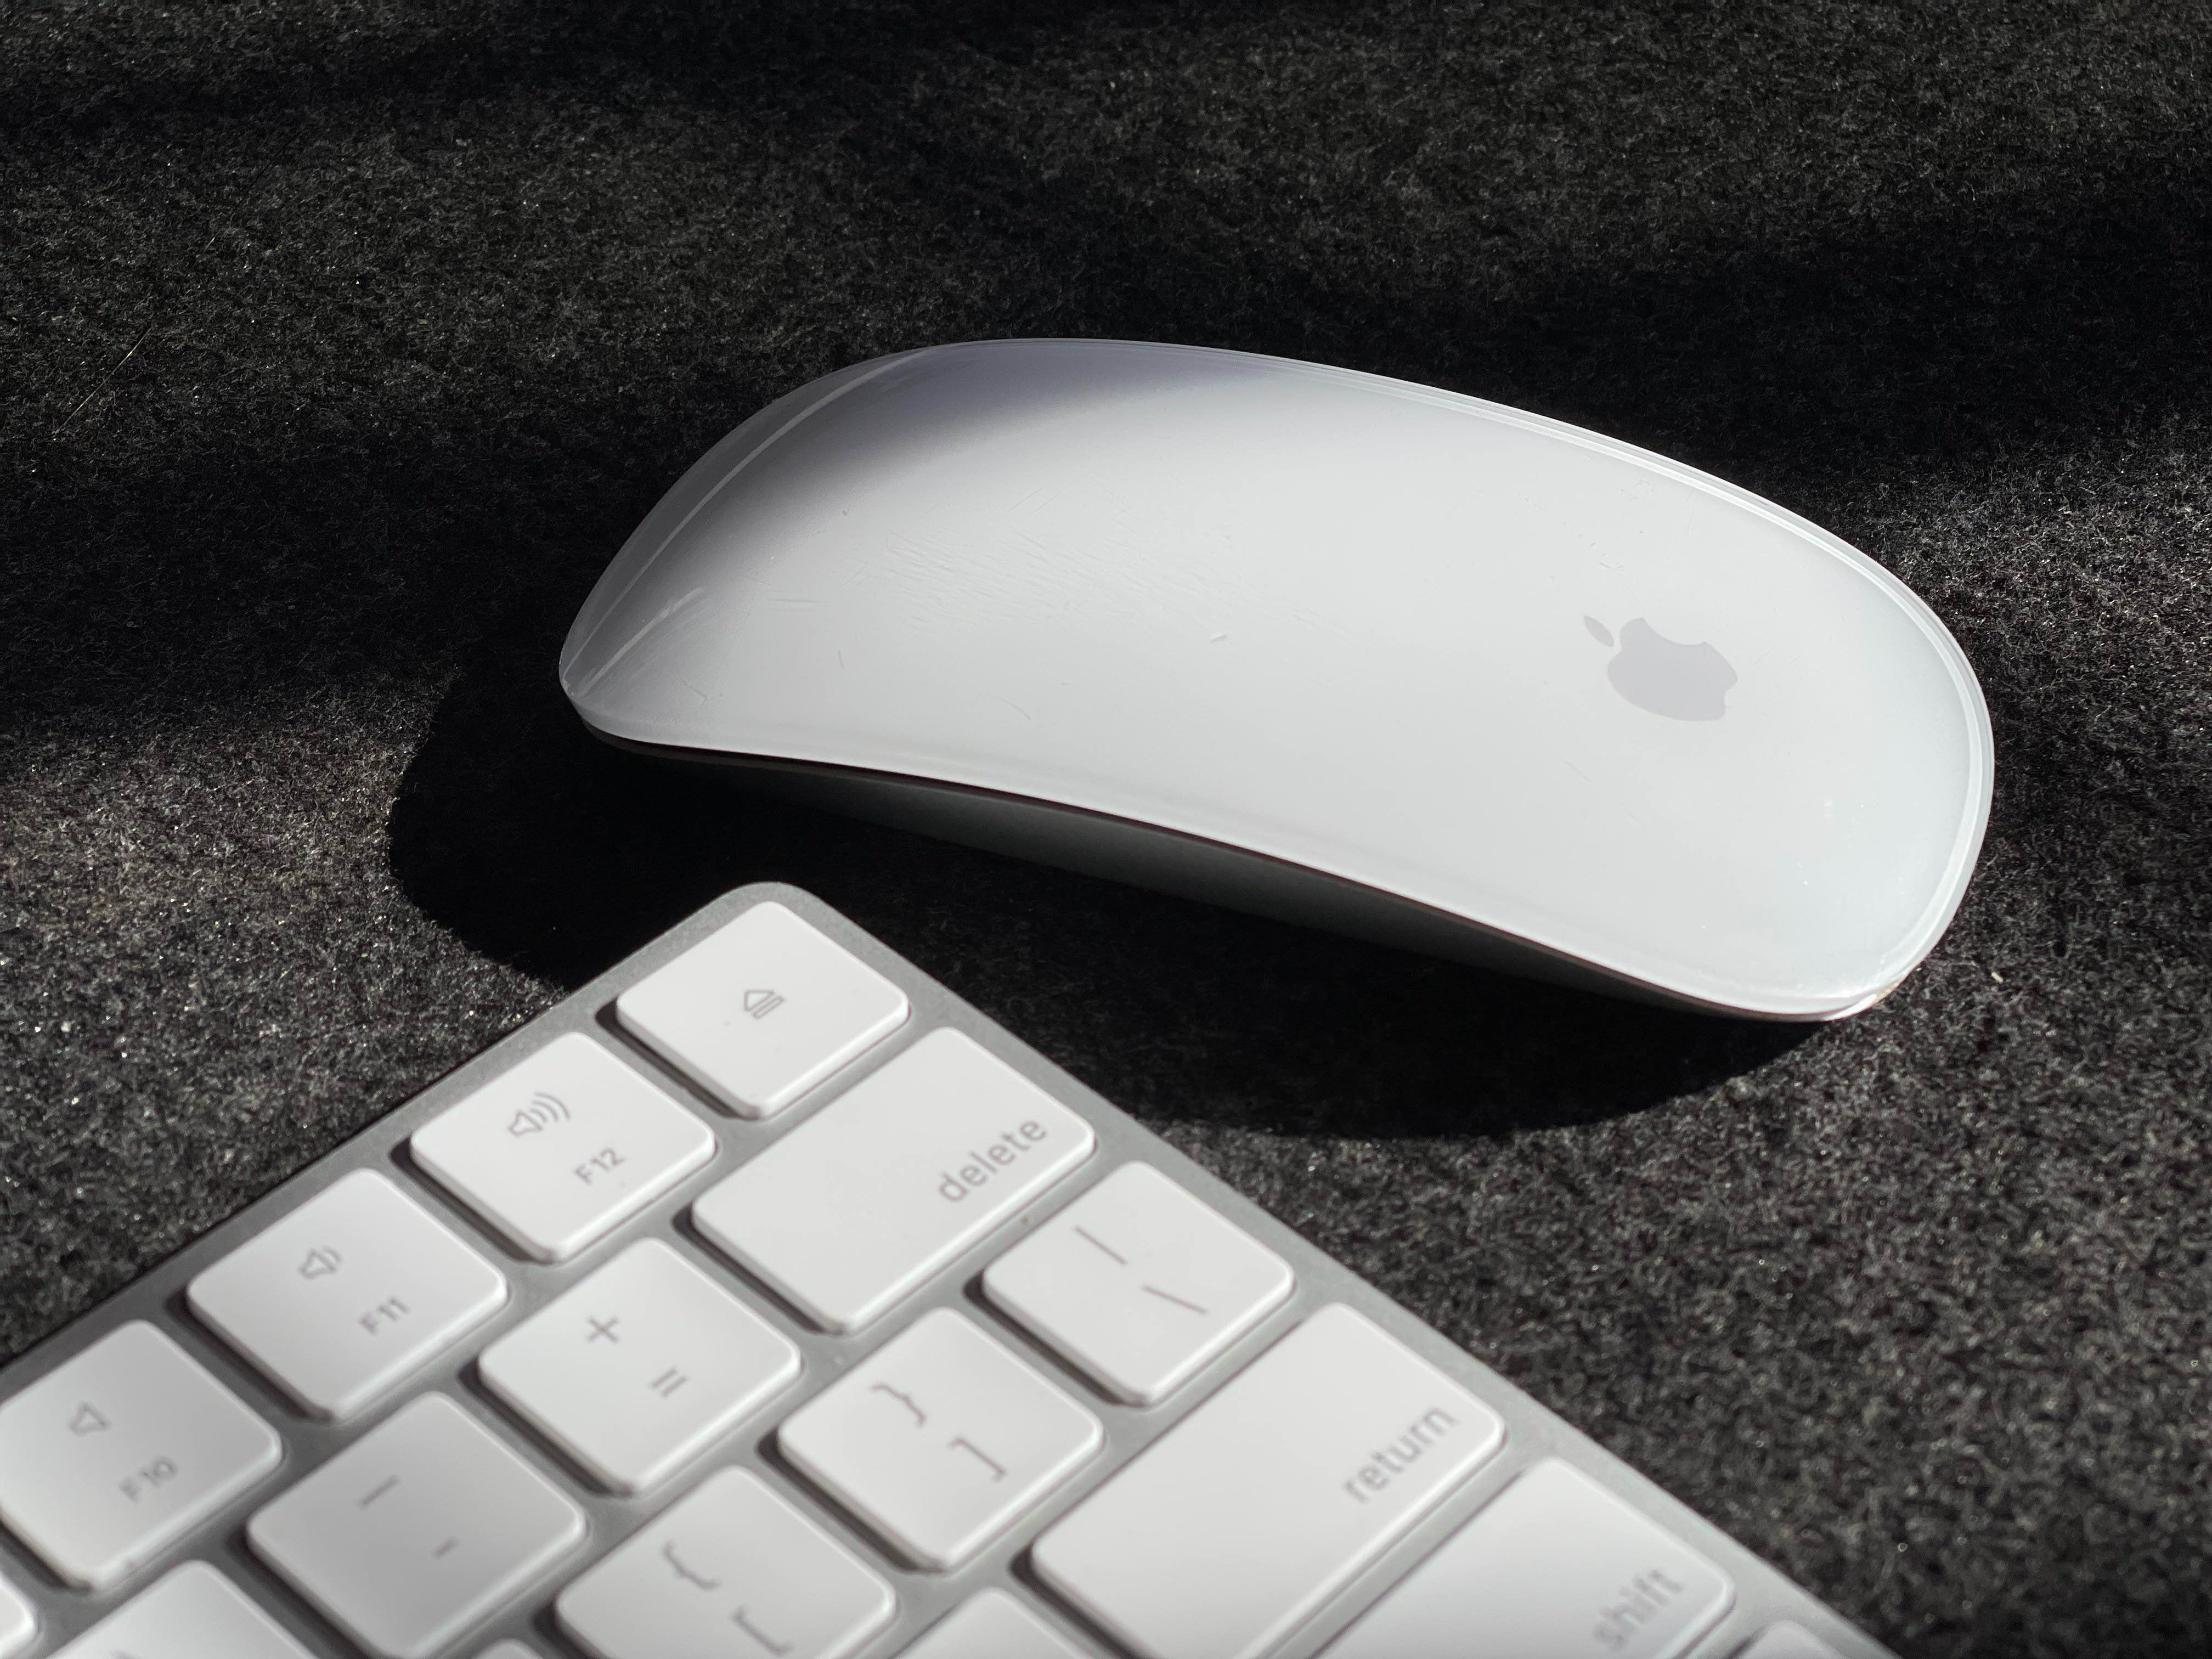 Eureka! Apple will finally update its Magic Mouse to USB-C and